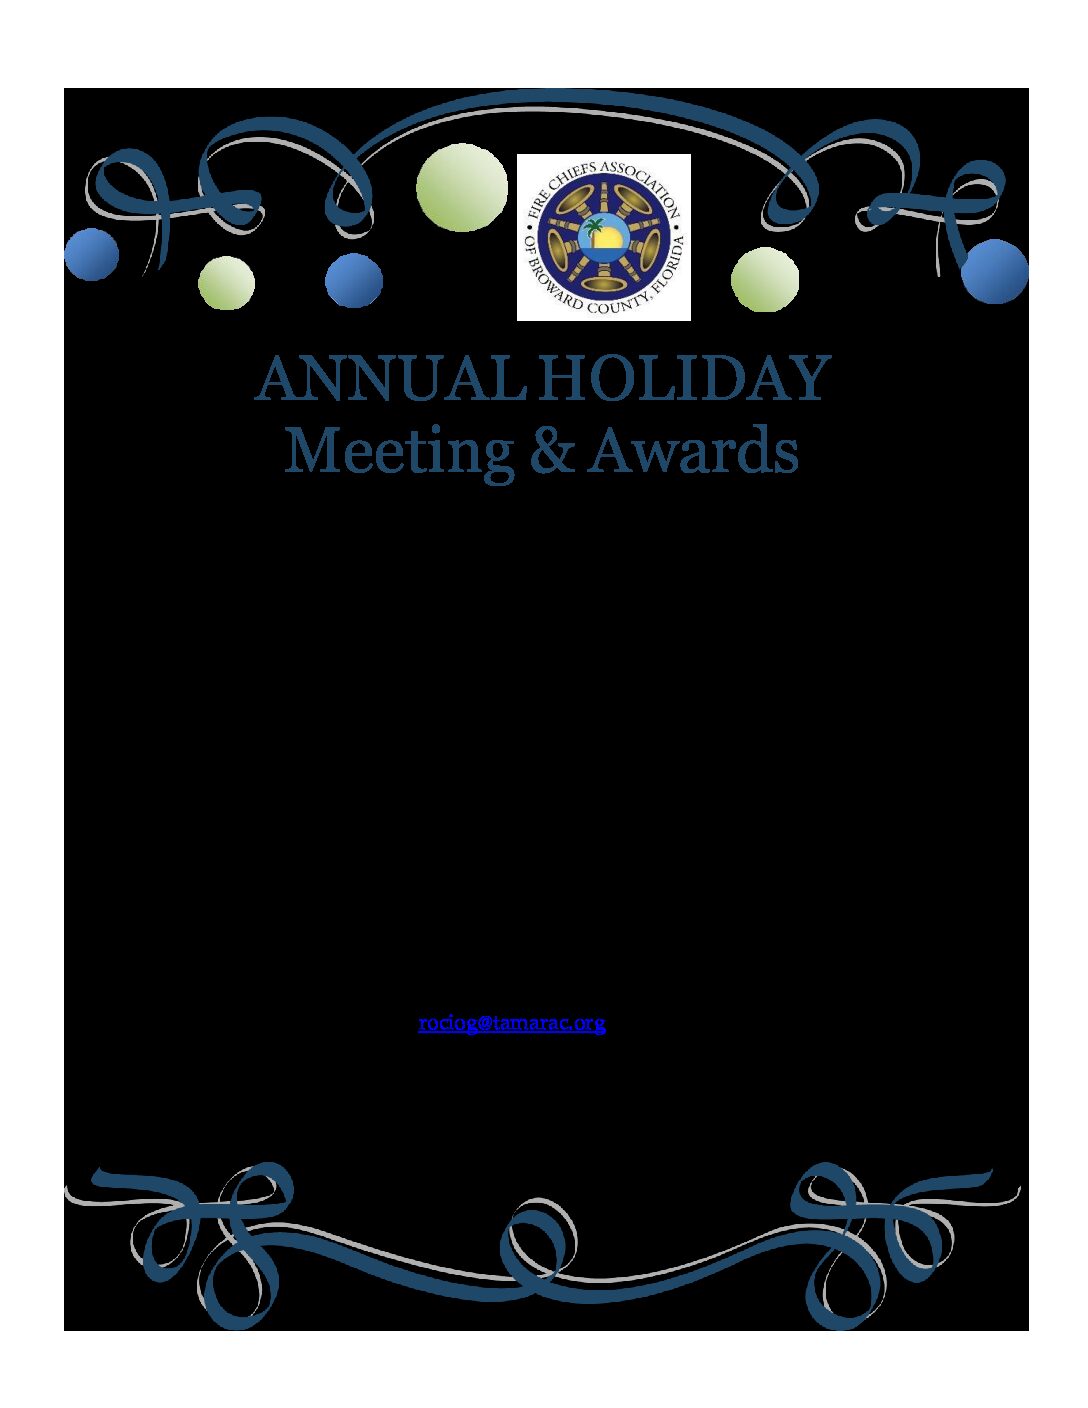 2021 ANNUAL HOLIDAY MEETING & AWARDS